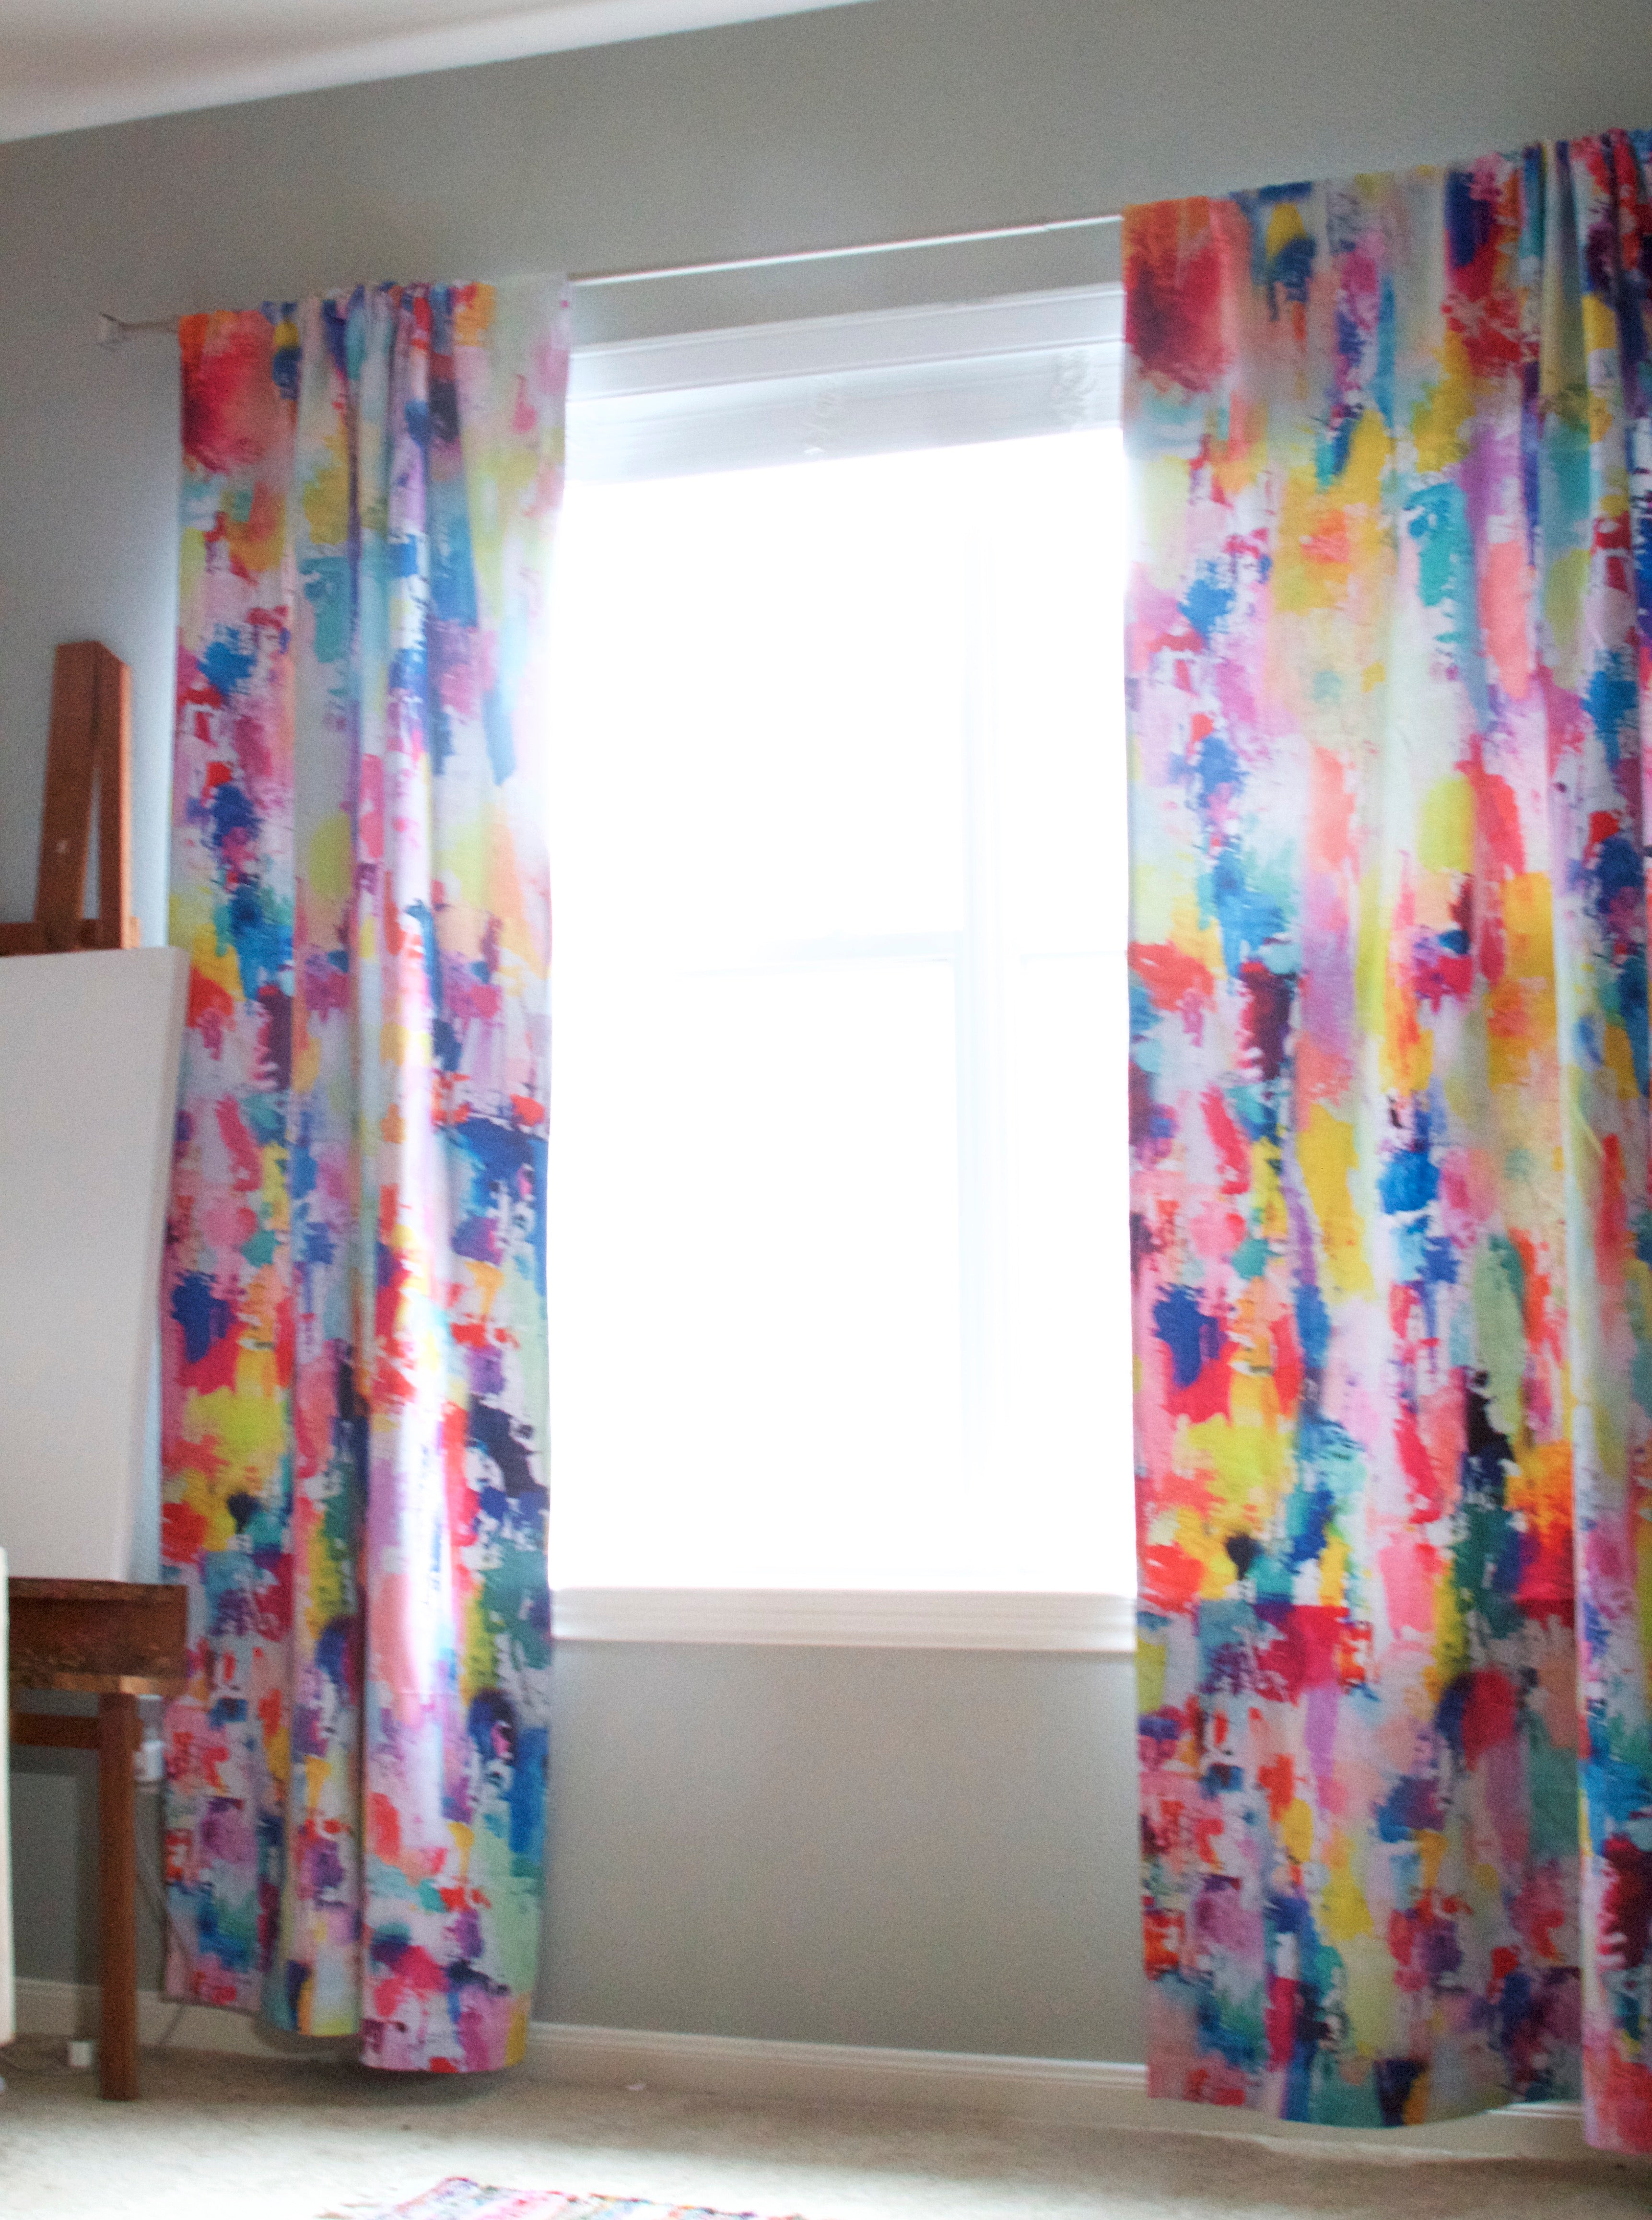 Colorful Neon + Pastel Abstract Painting Art Curtains.